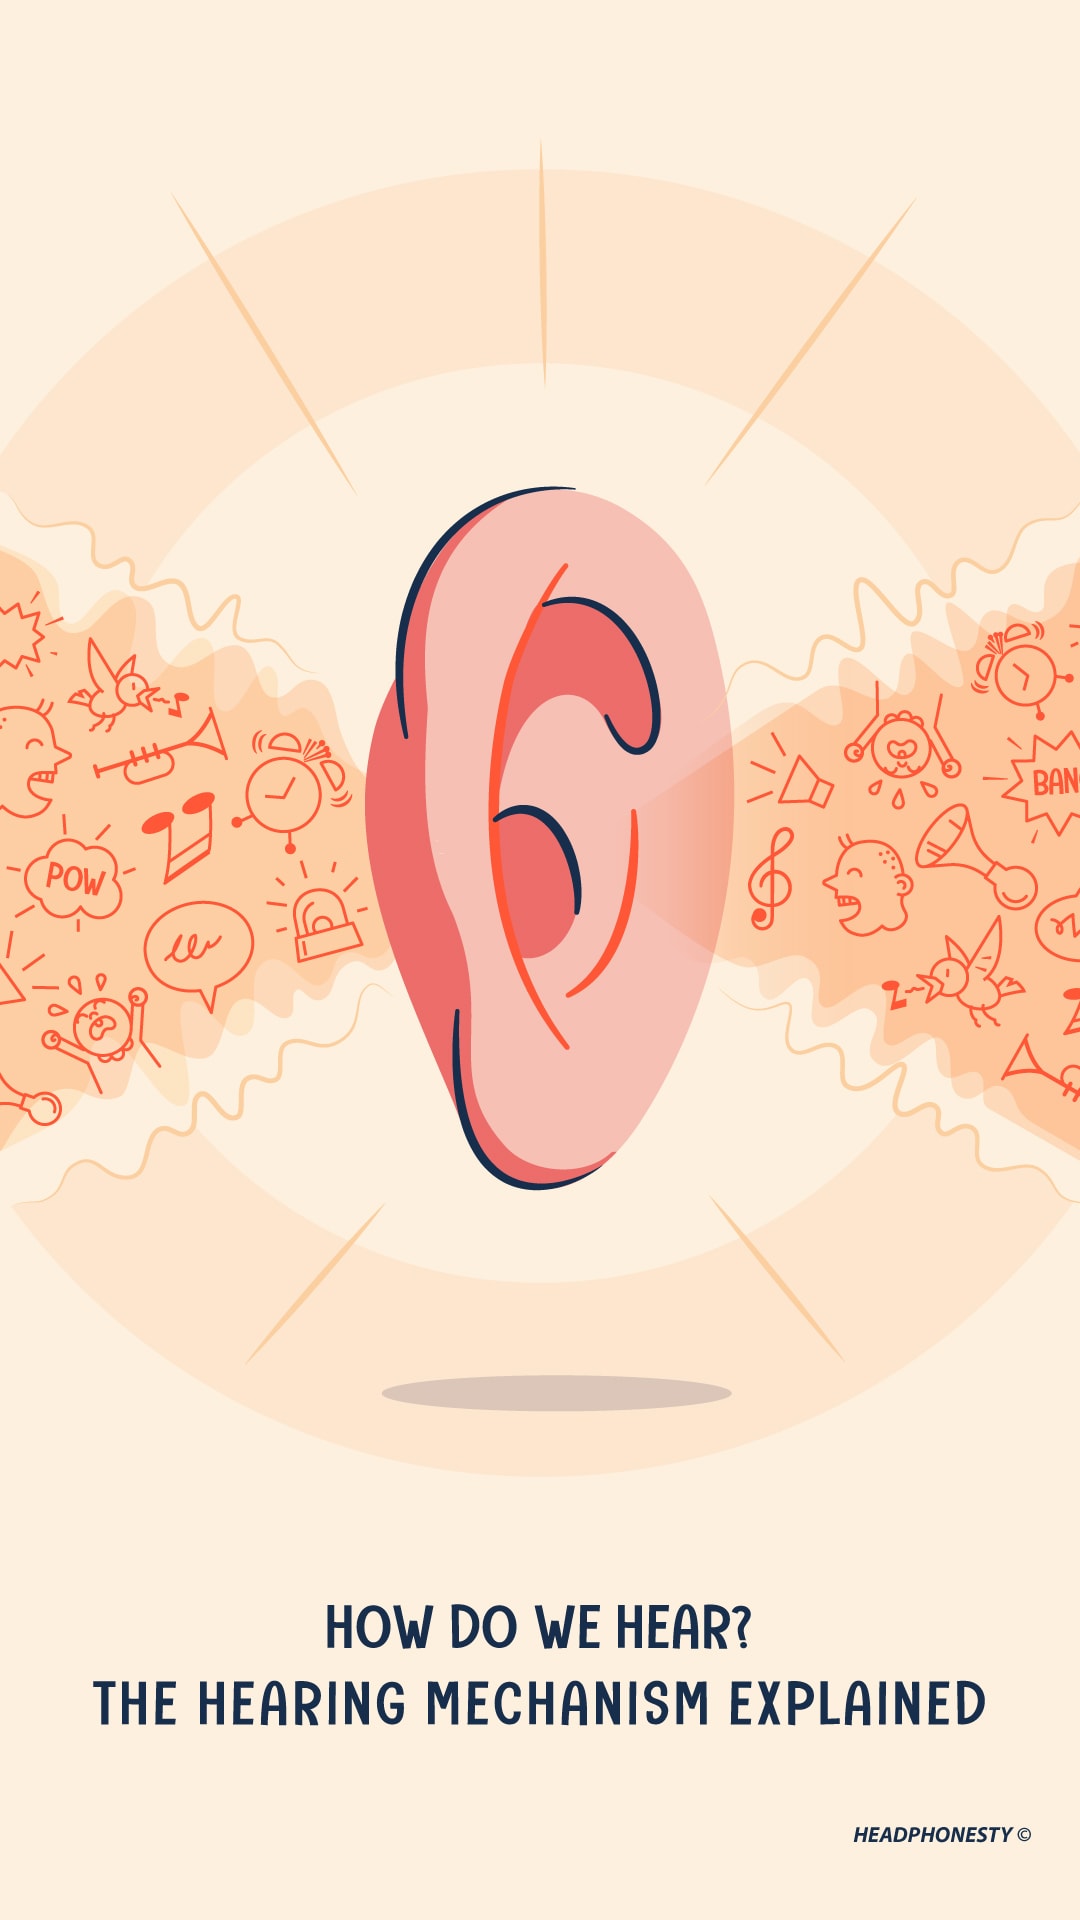 How Do Human Hear Sound  The Hearing Mechanism Explained - 22